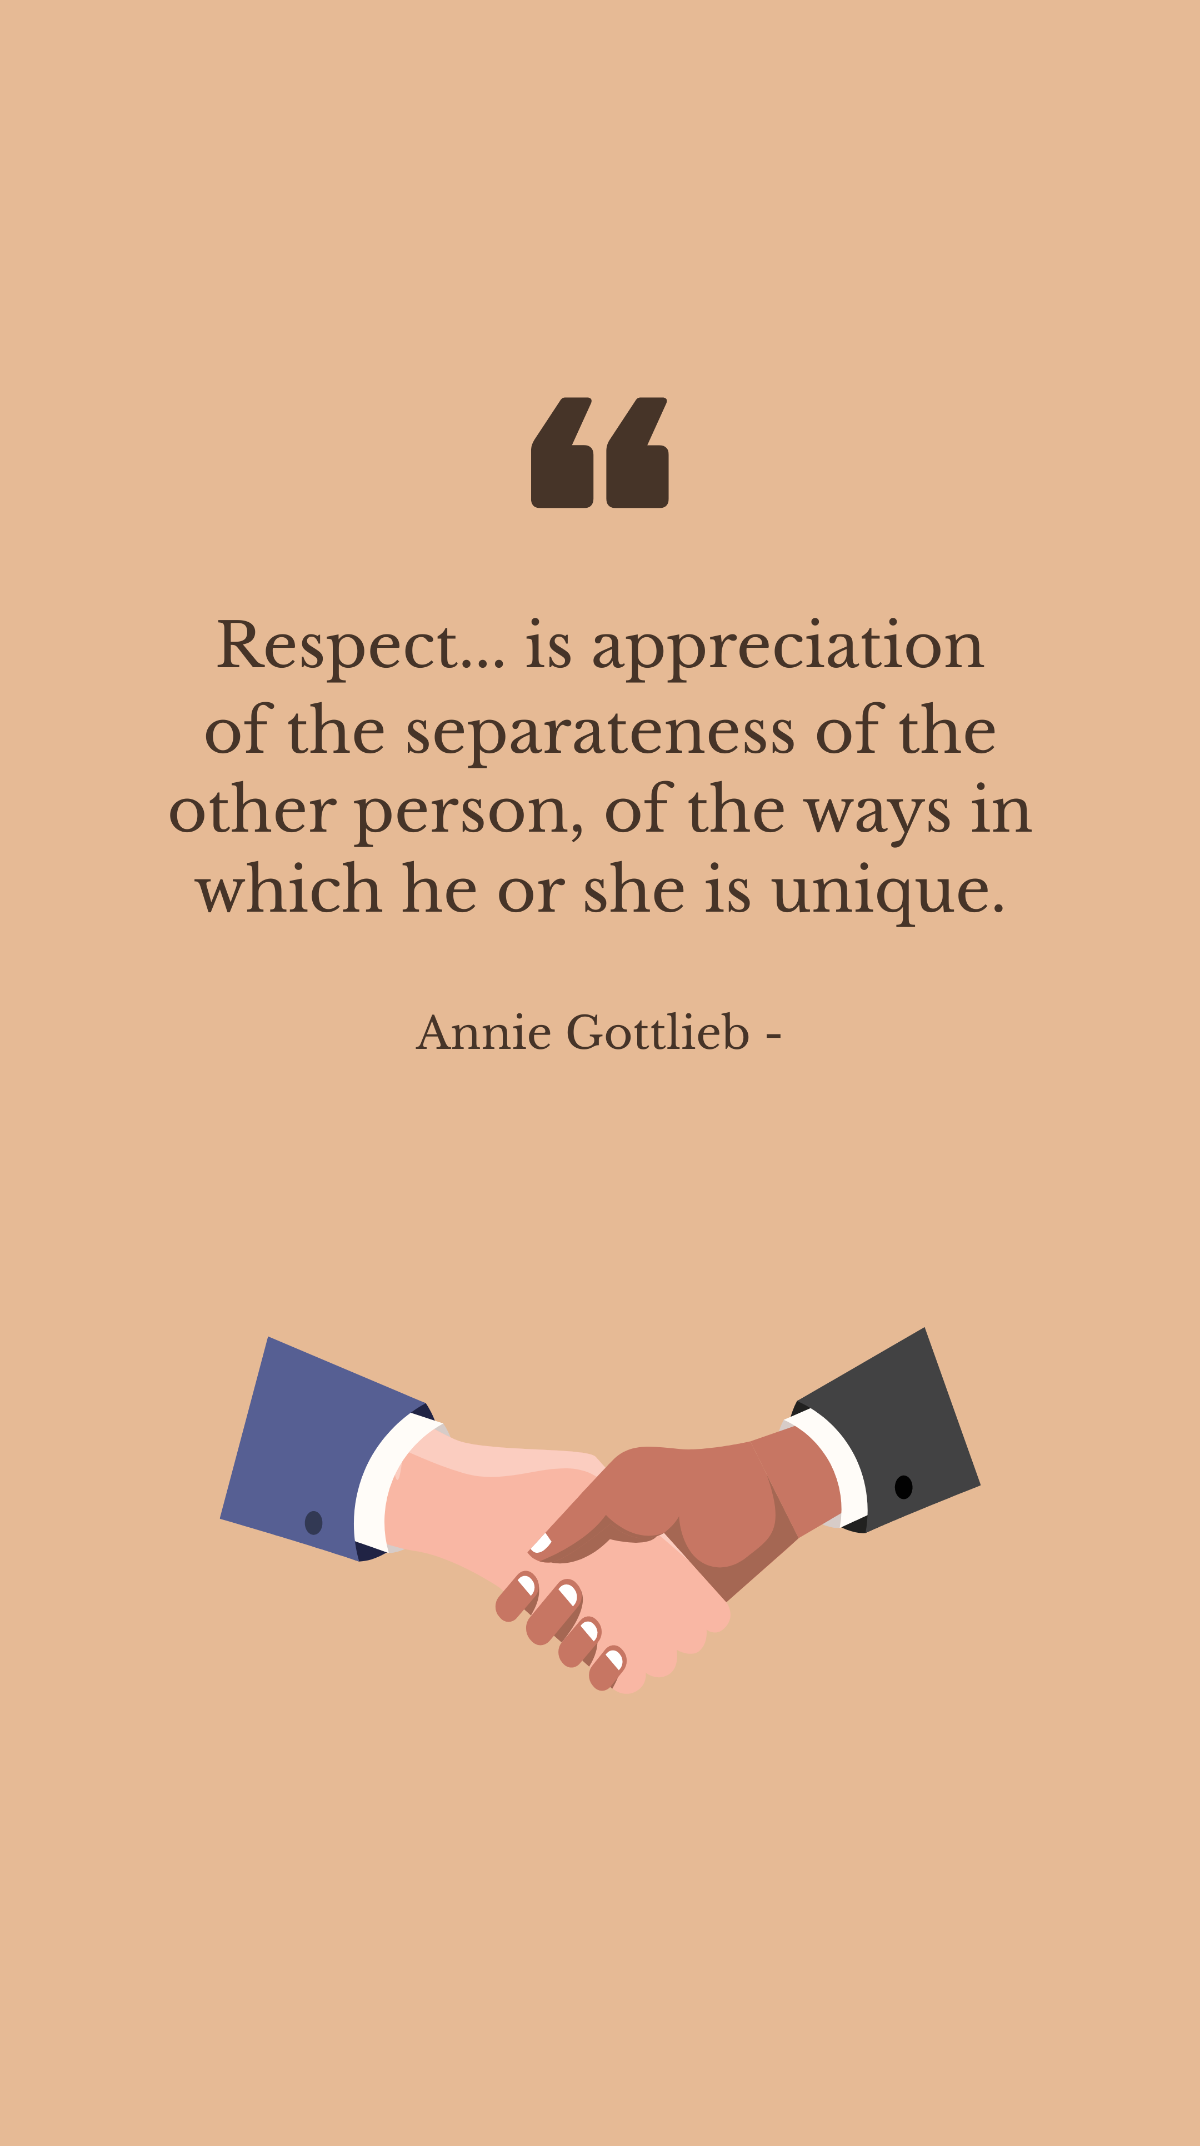 Annie Gottlieb - Respect... is appreciation of the separateness of the other person, of the ways in which he or she is unique. Template